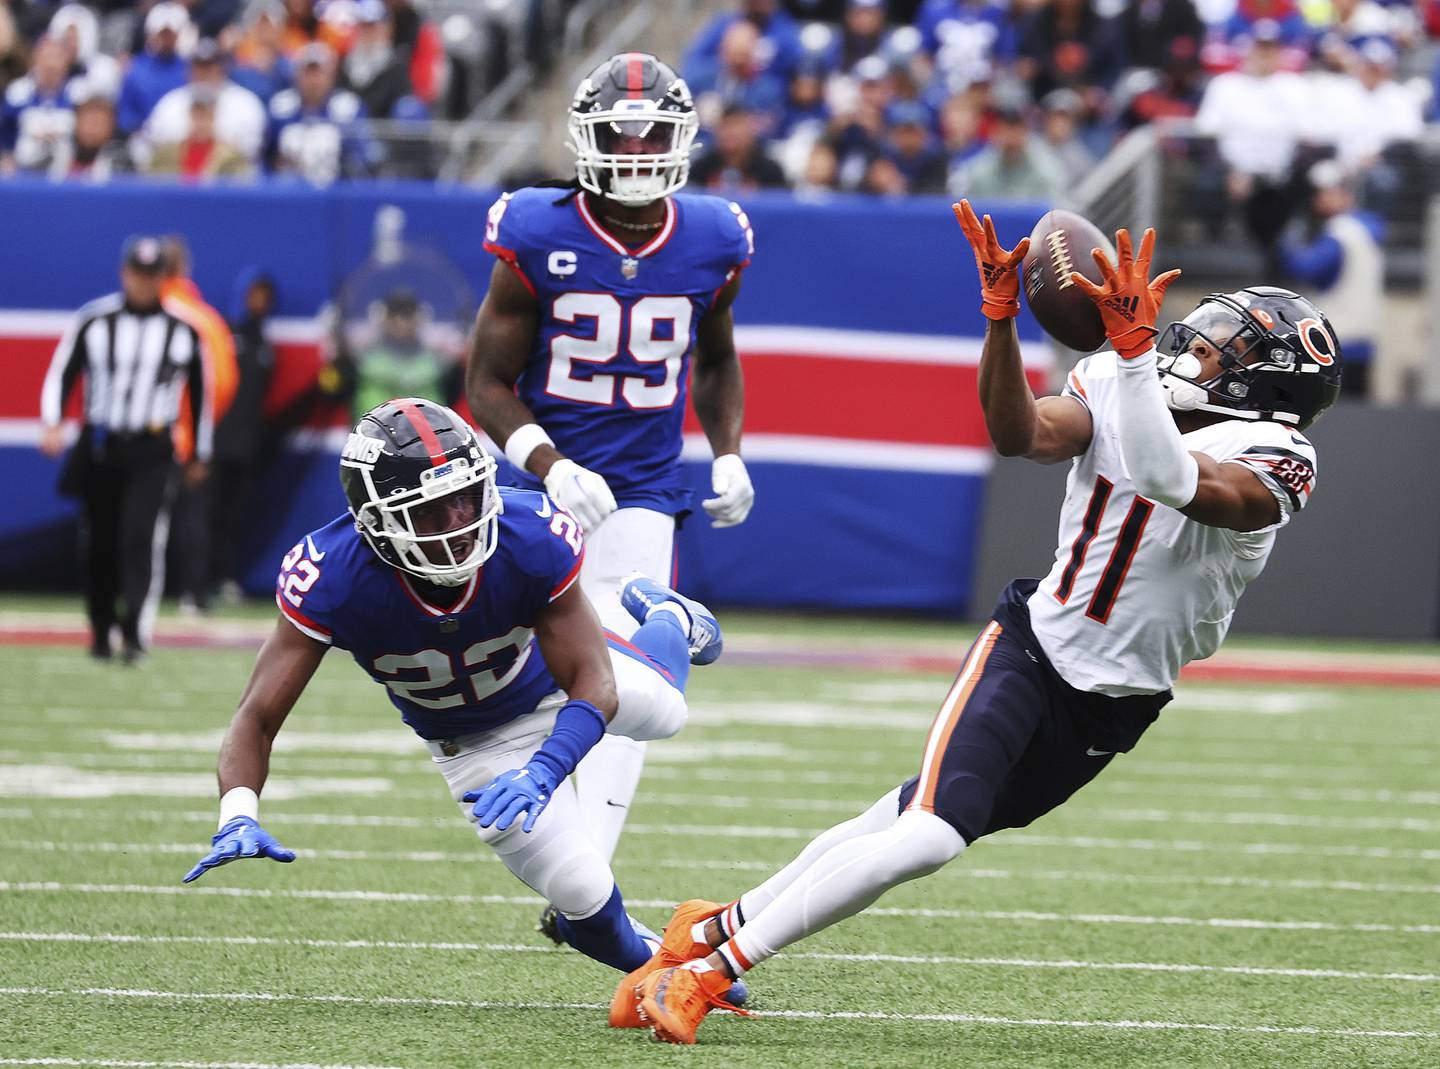 Bears receiver Darnell Mooney makes a catch during the first quarter against the Giants' Adoree' Jackson (22) on Oct. 2, 2022, at MetLife Stadium in East Rutherford, N.J.